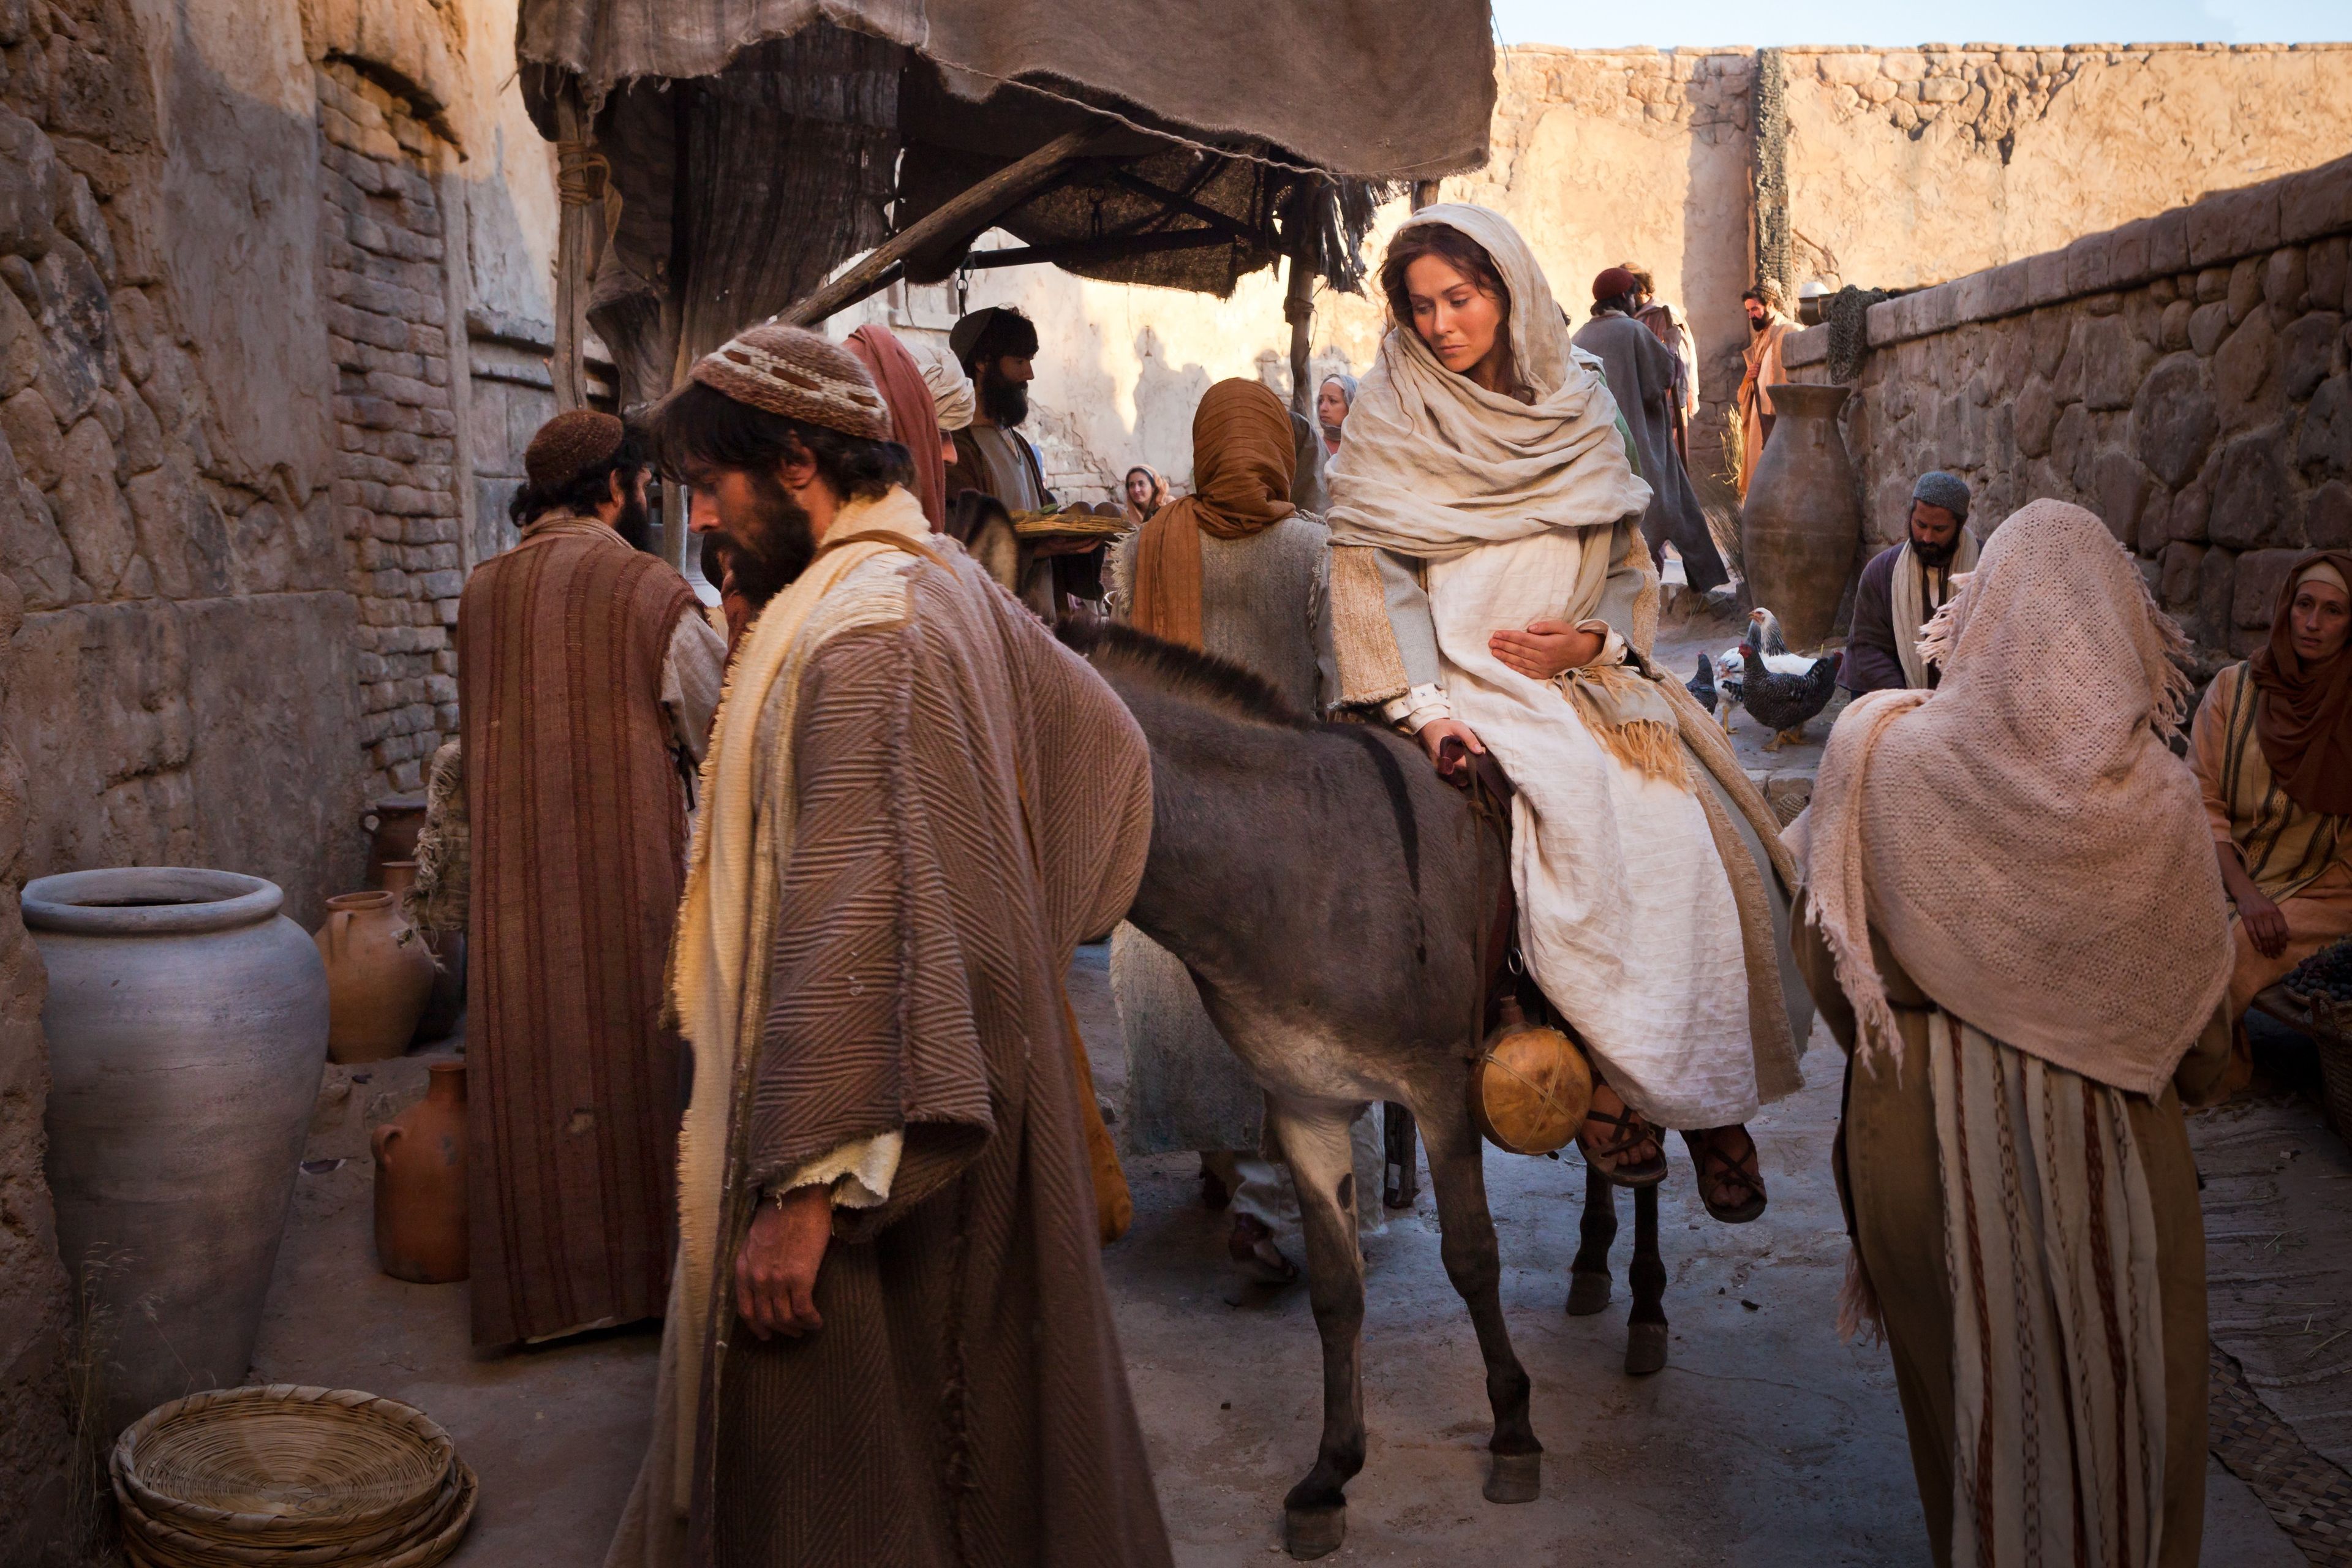 Mary and Joseph enter Bethlehem and begin searching for an inn.